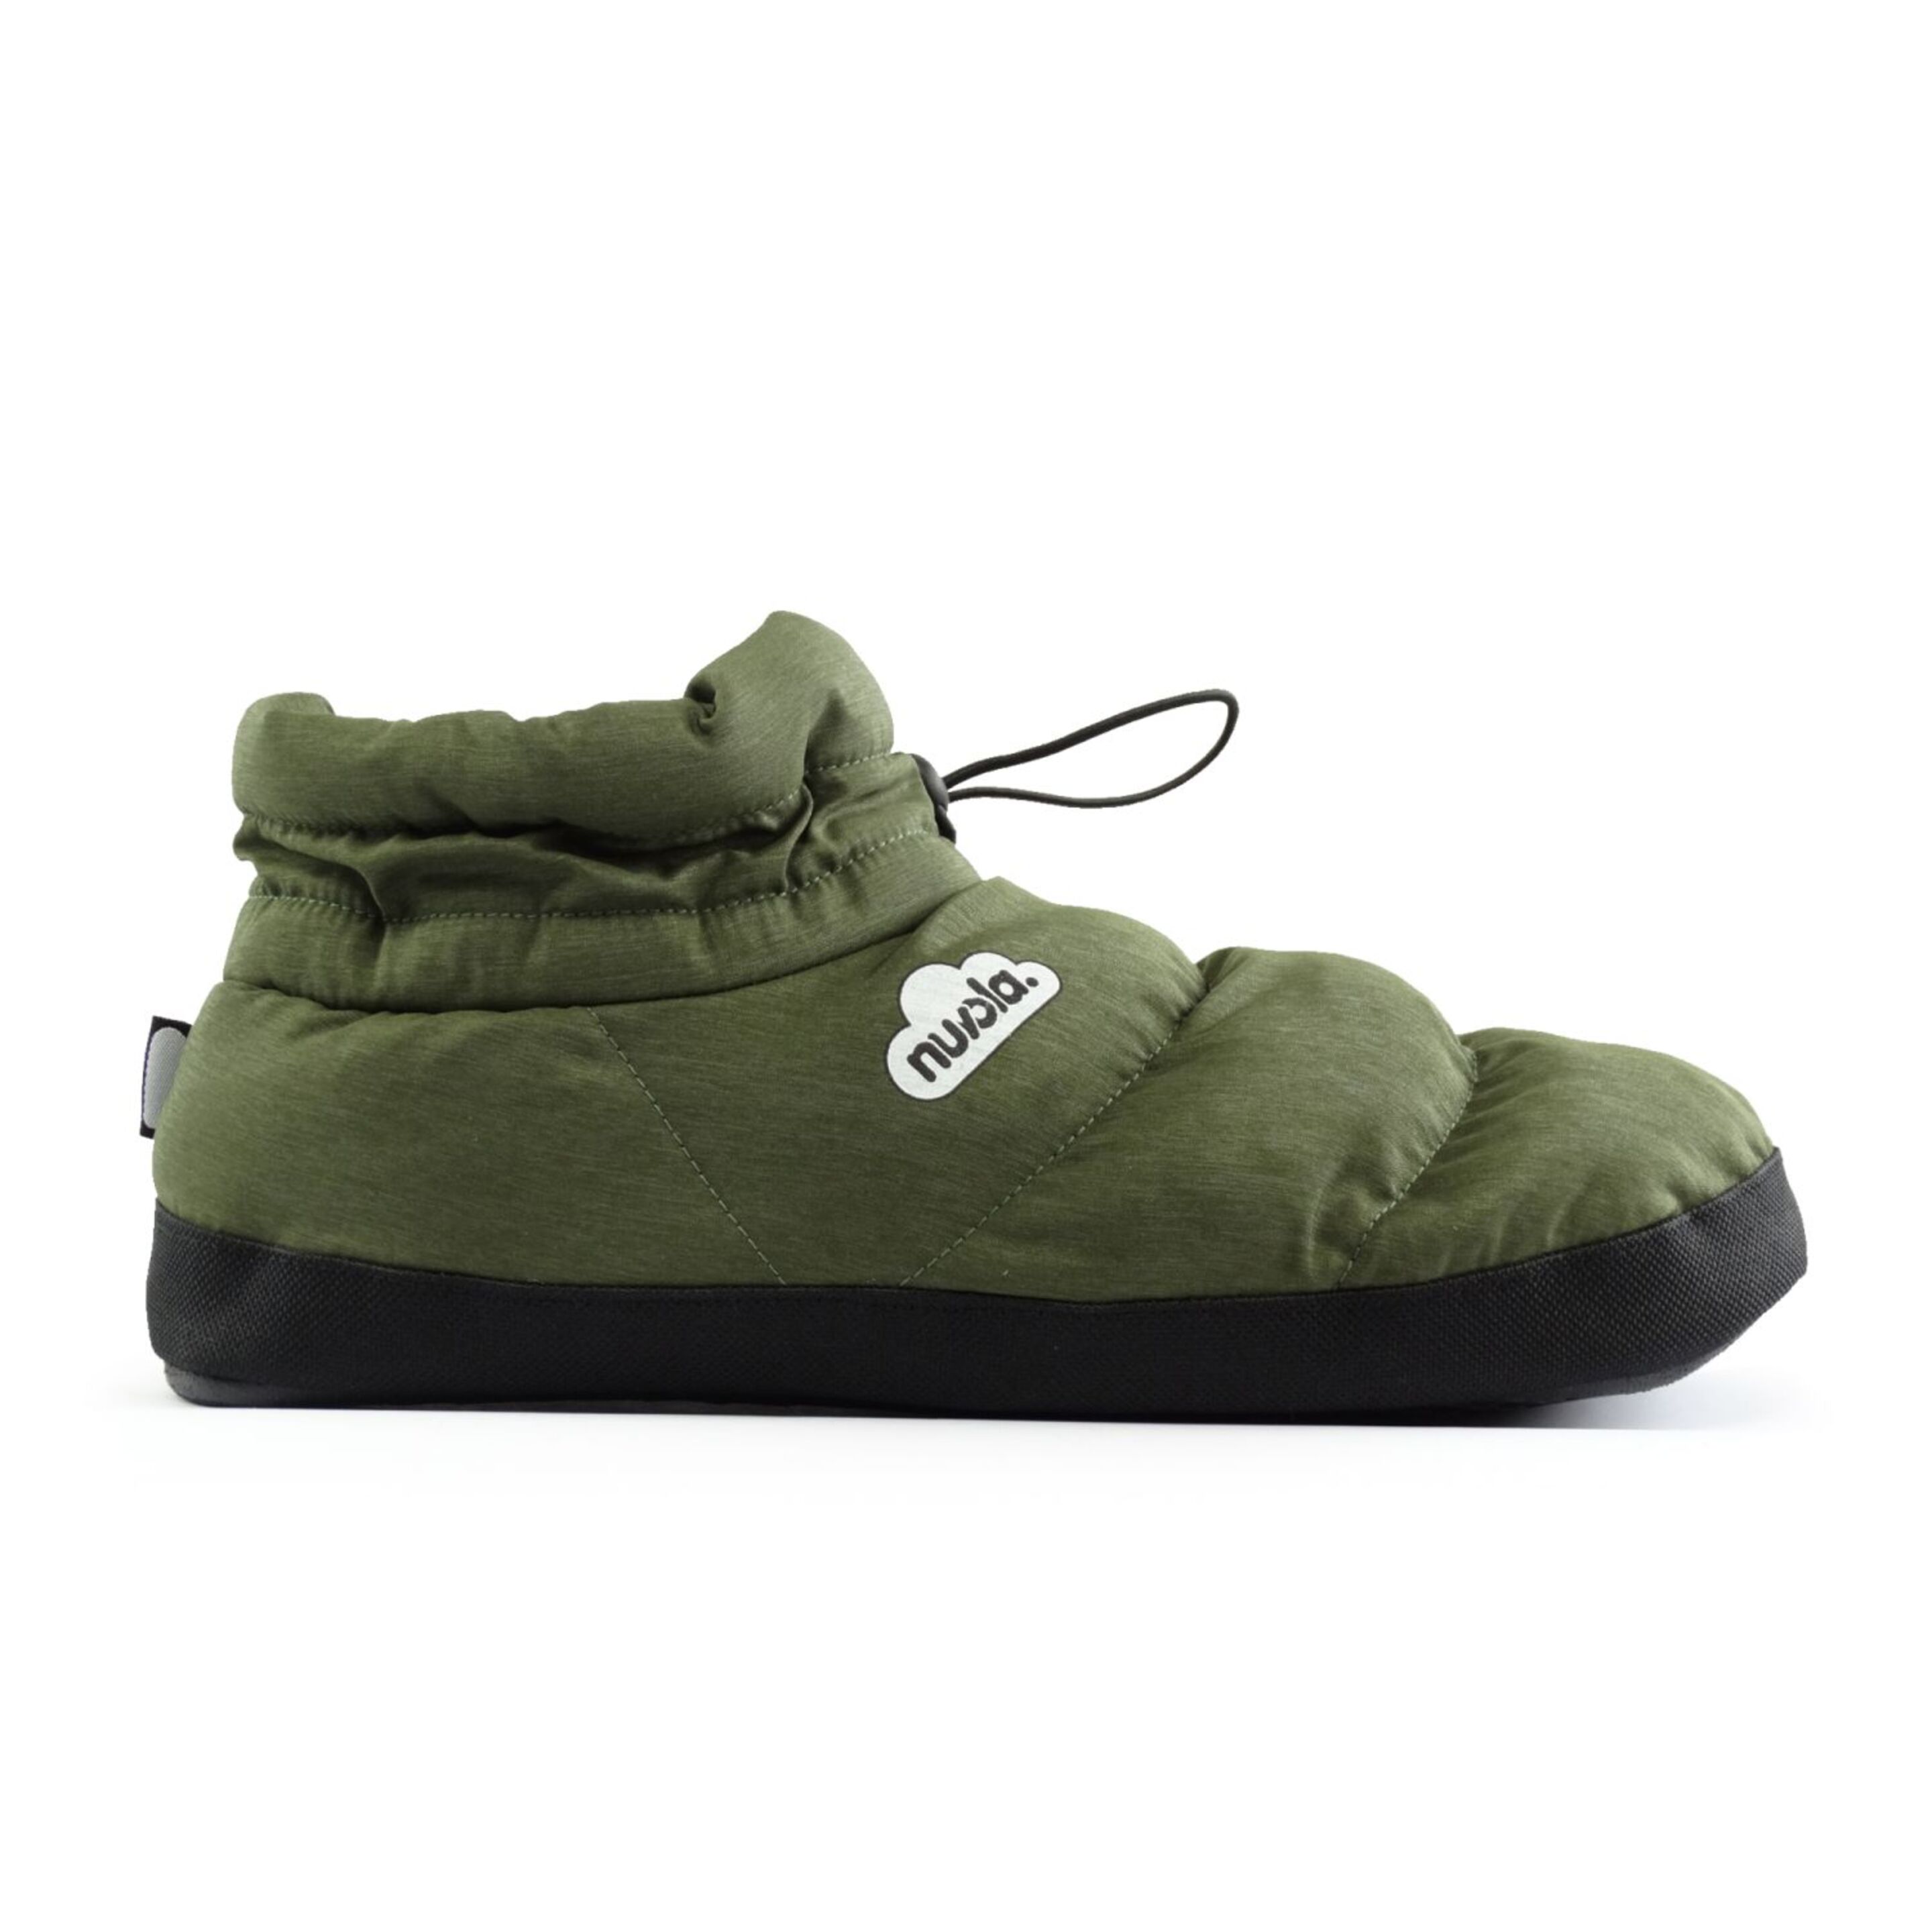 Slippers Camping NuvolaÂ®,boot Home Marbled Suela De Goma